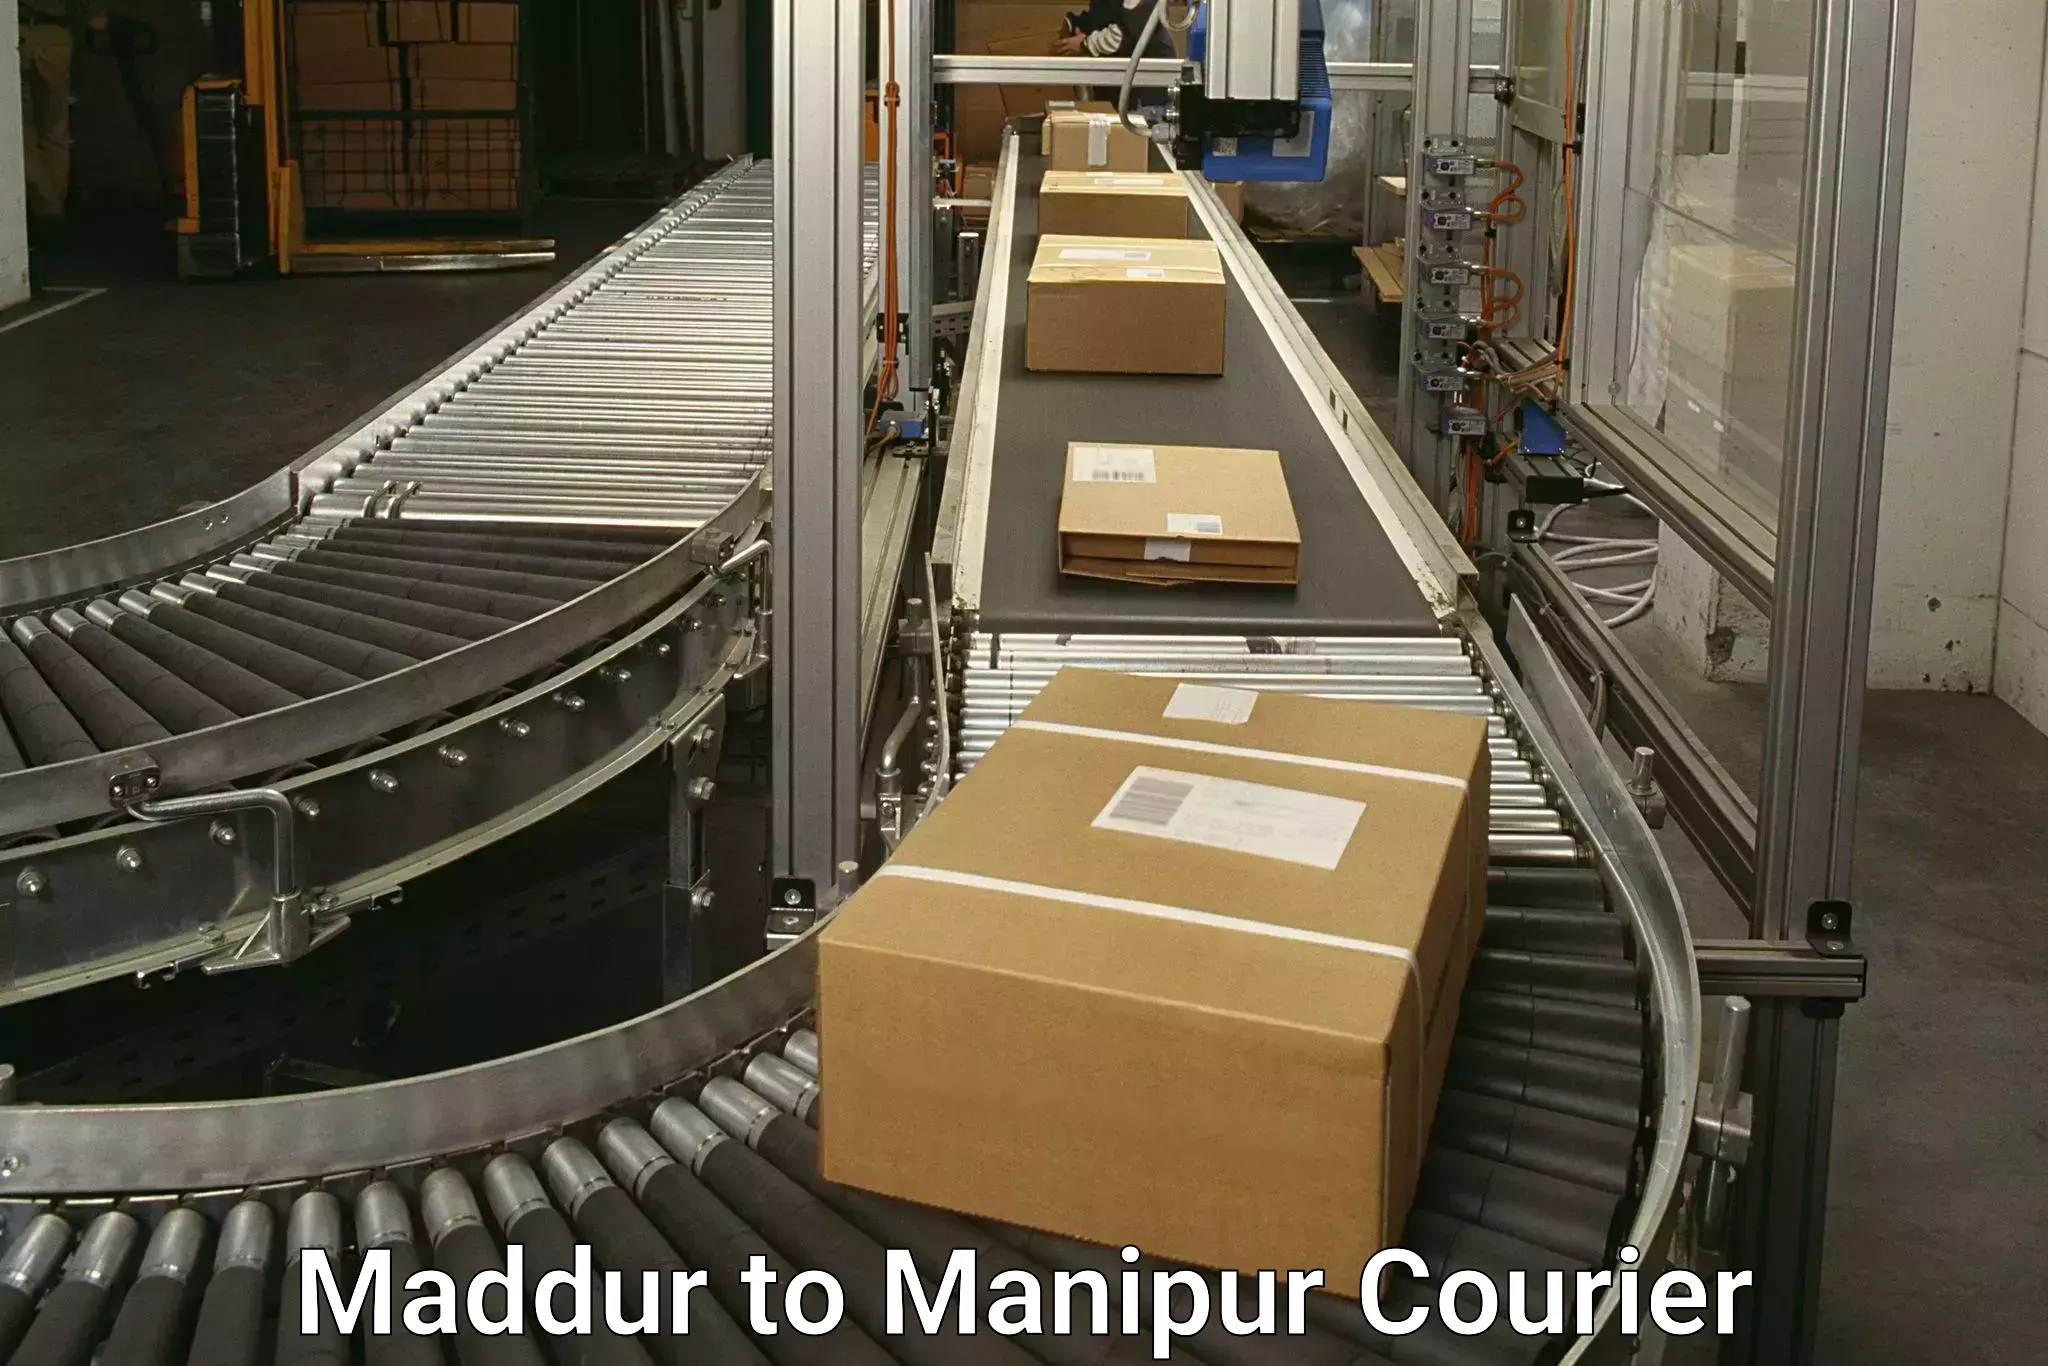 Quality courier services Maddur to Manipur